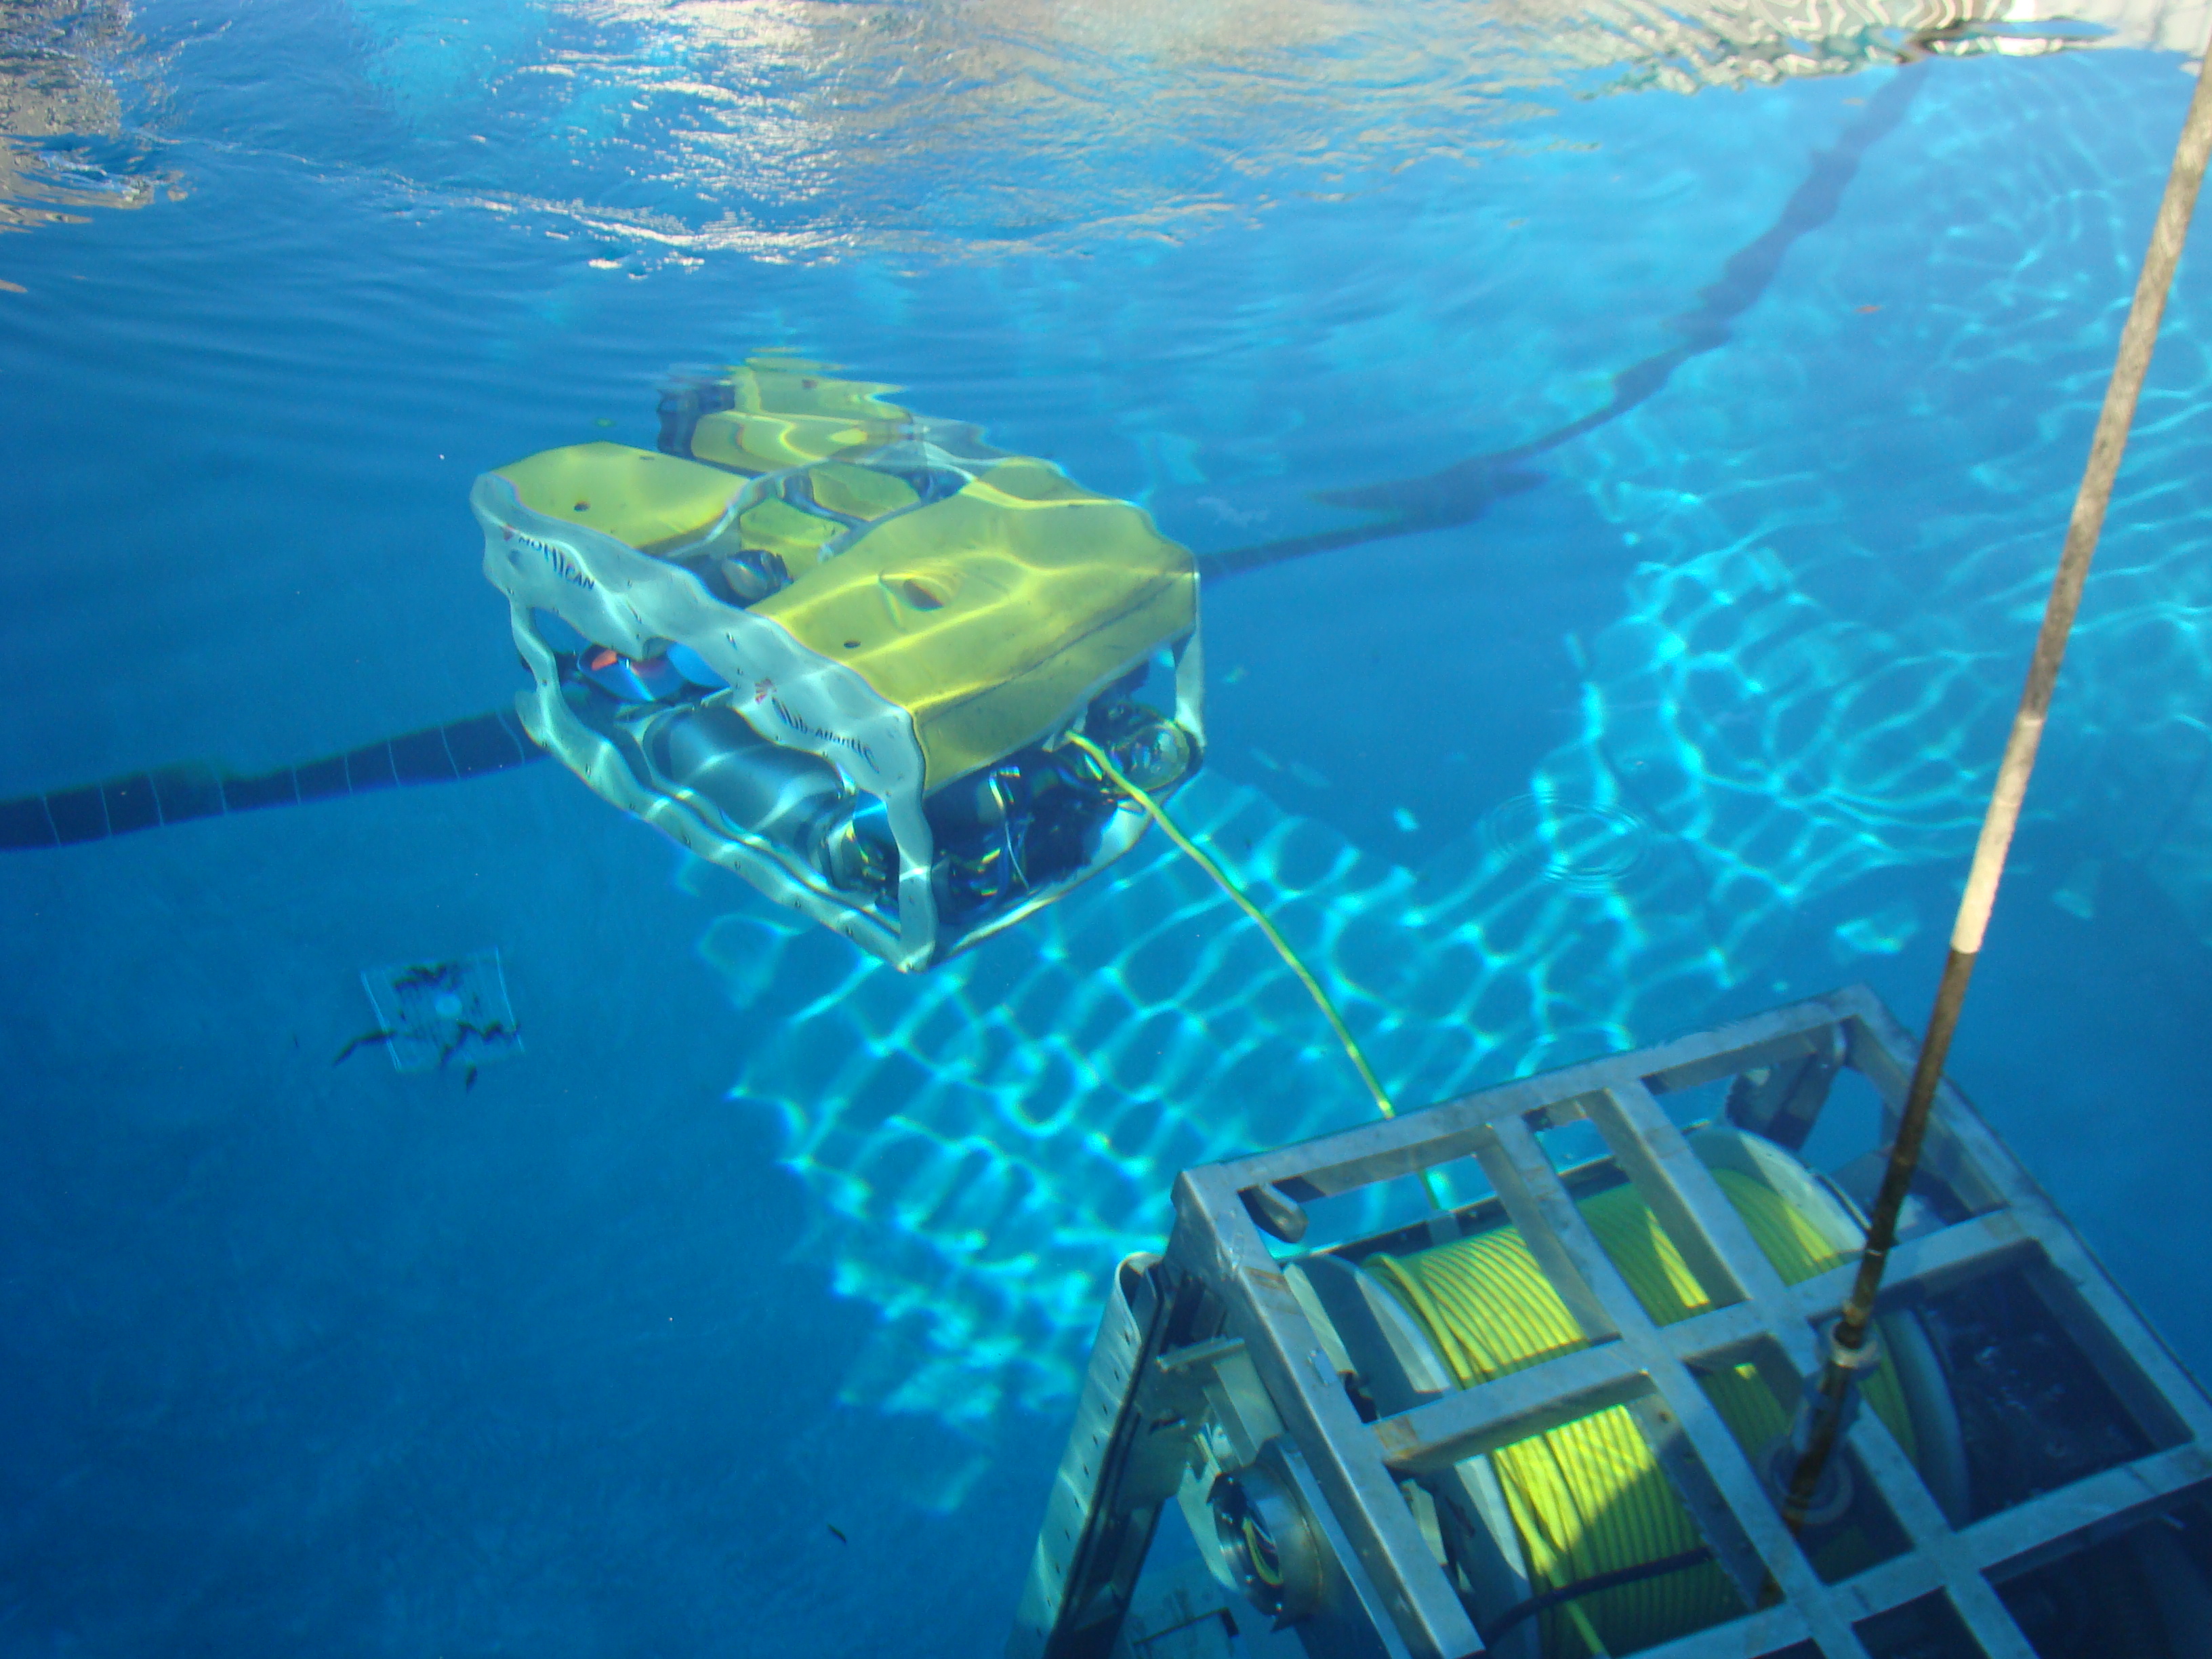 Mohican ROV in Underwater Test Pool